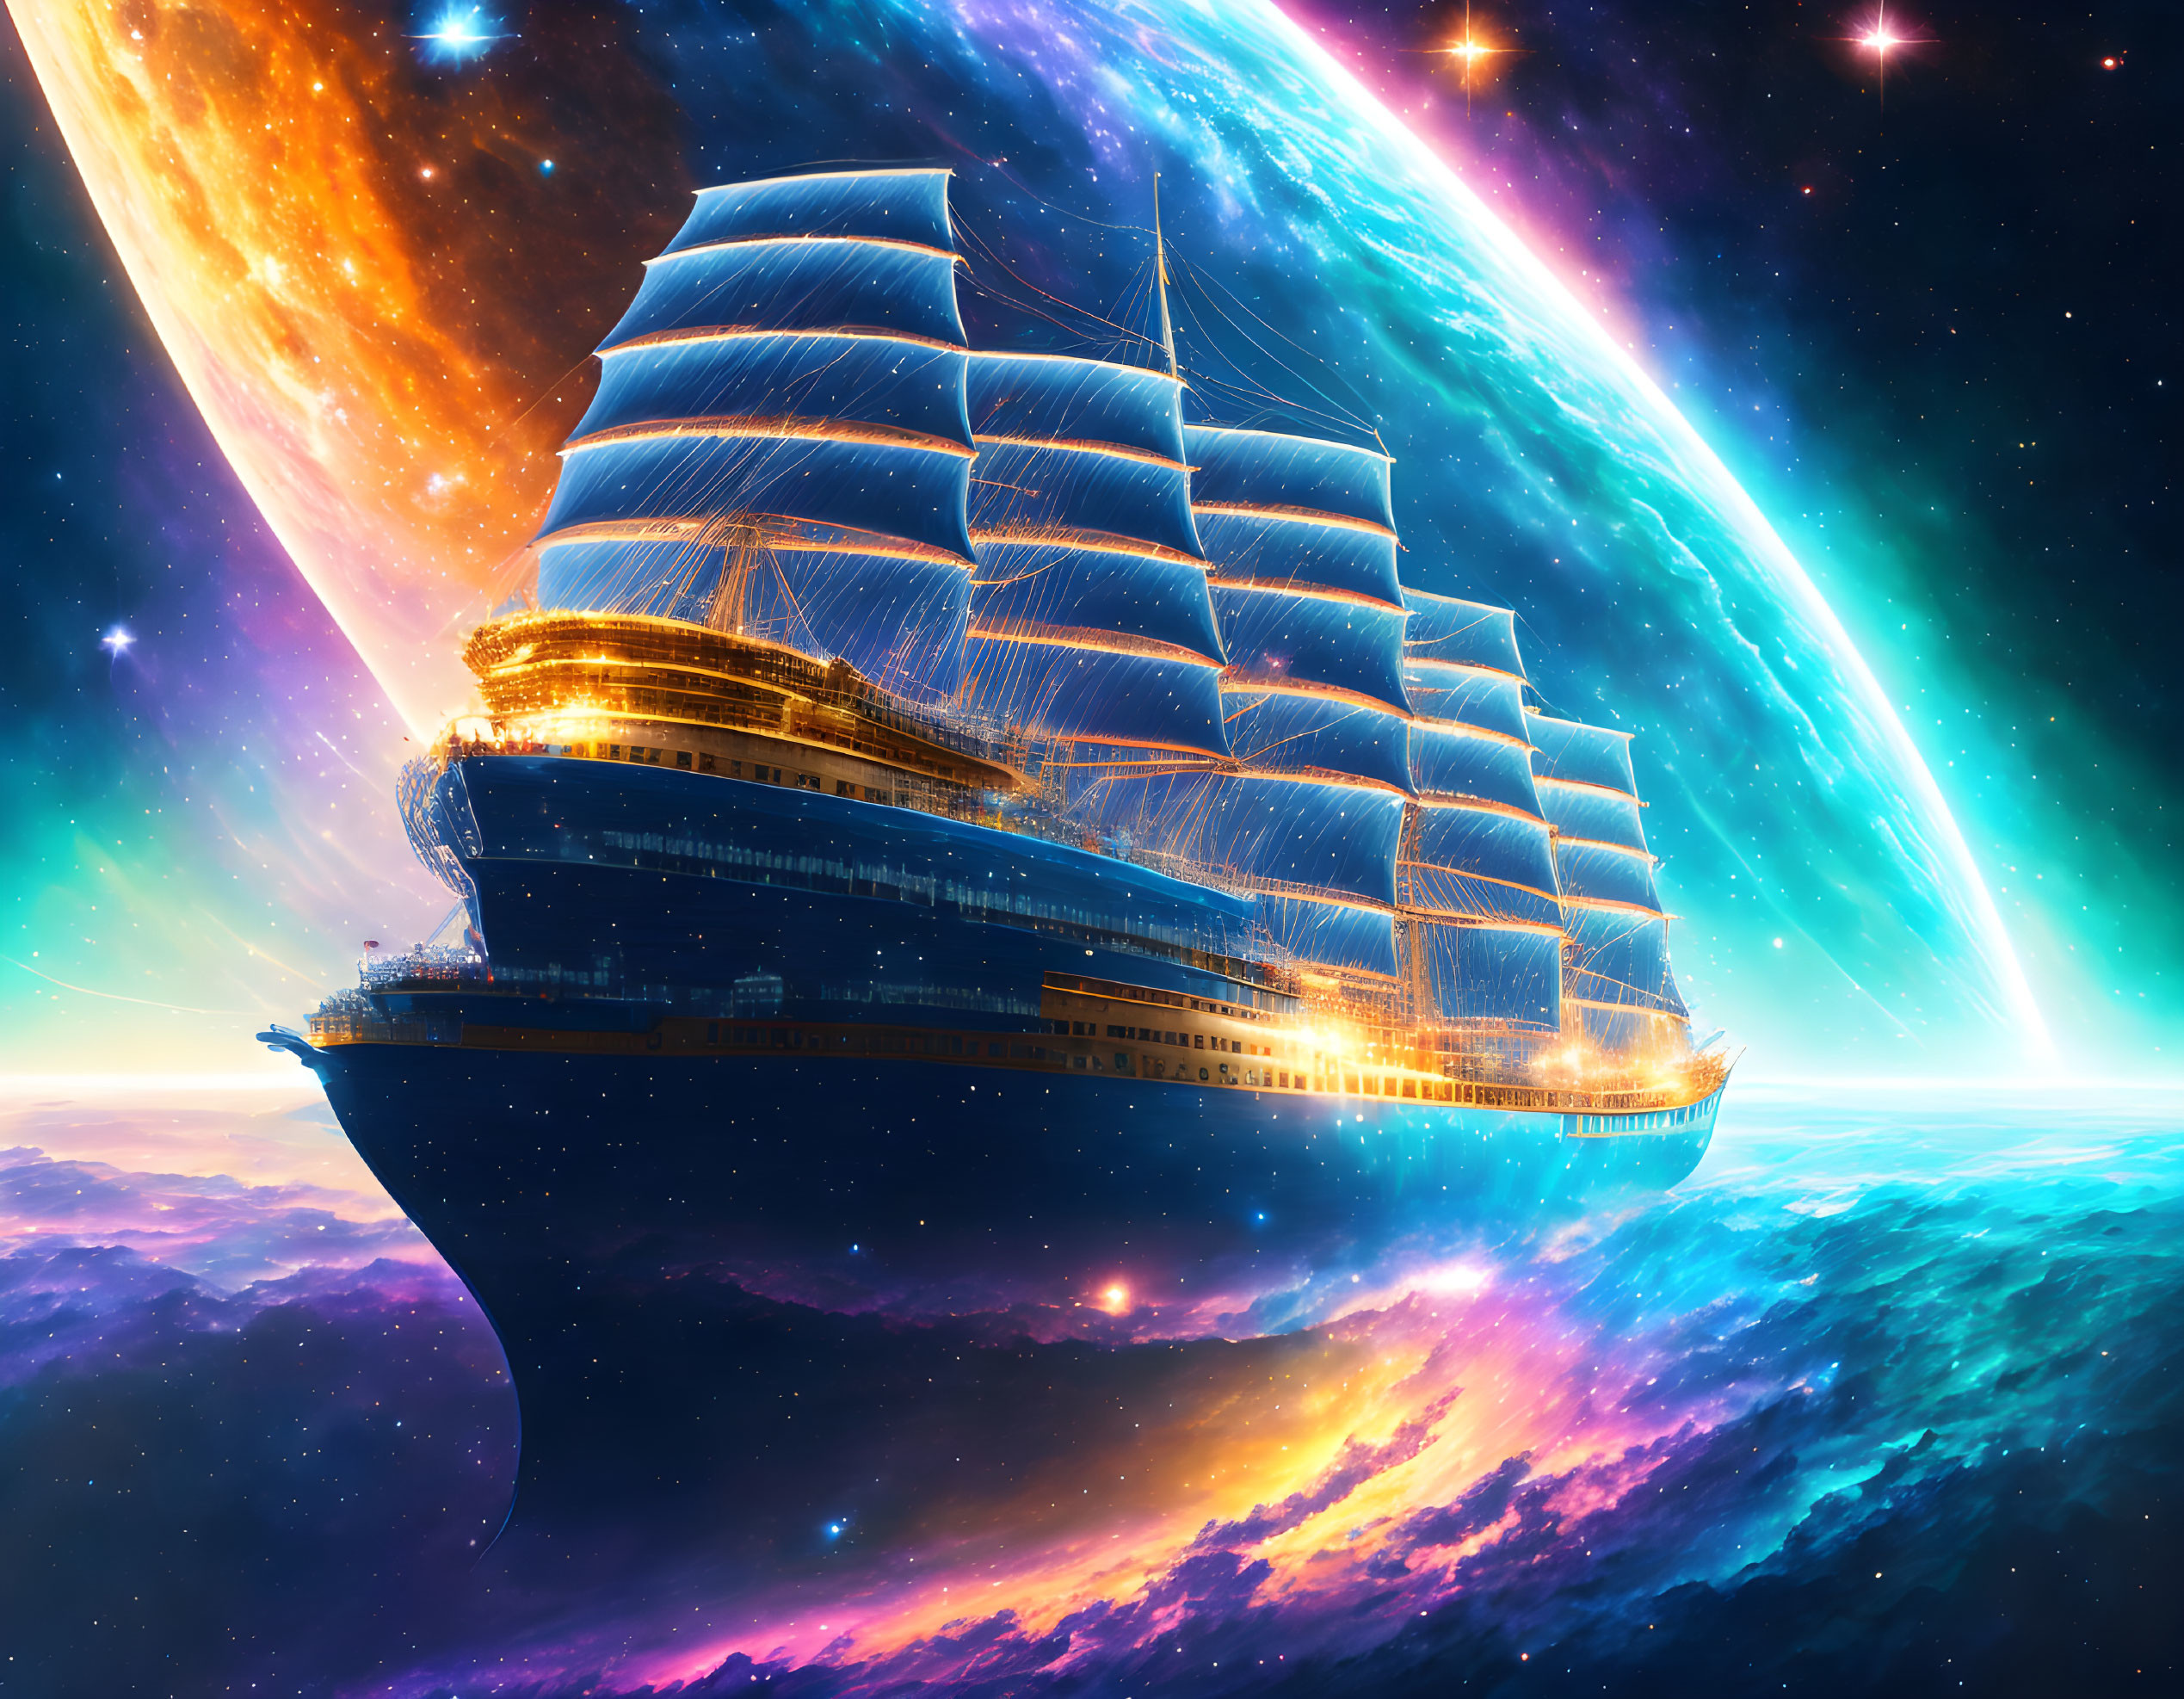 Sailing ship in space